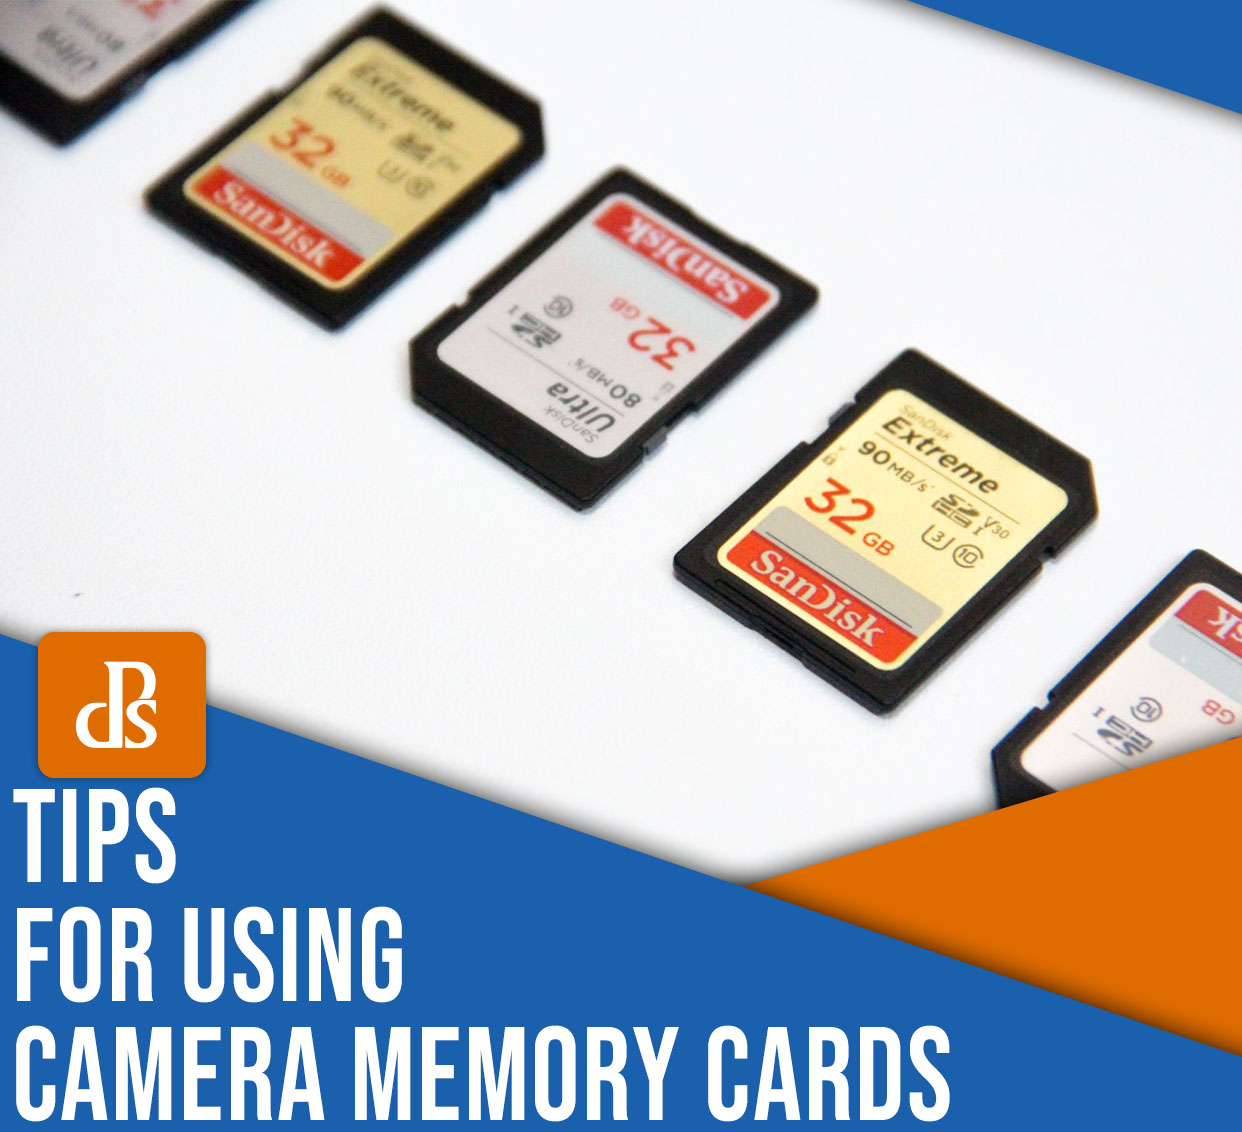 Tips for using camera memory cards